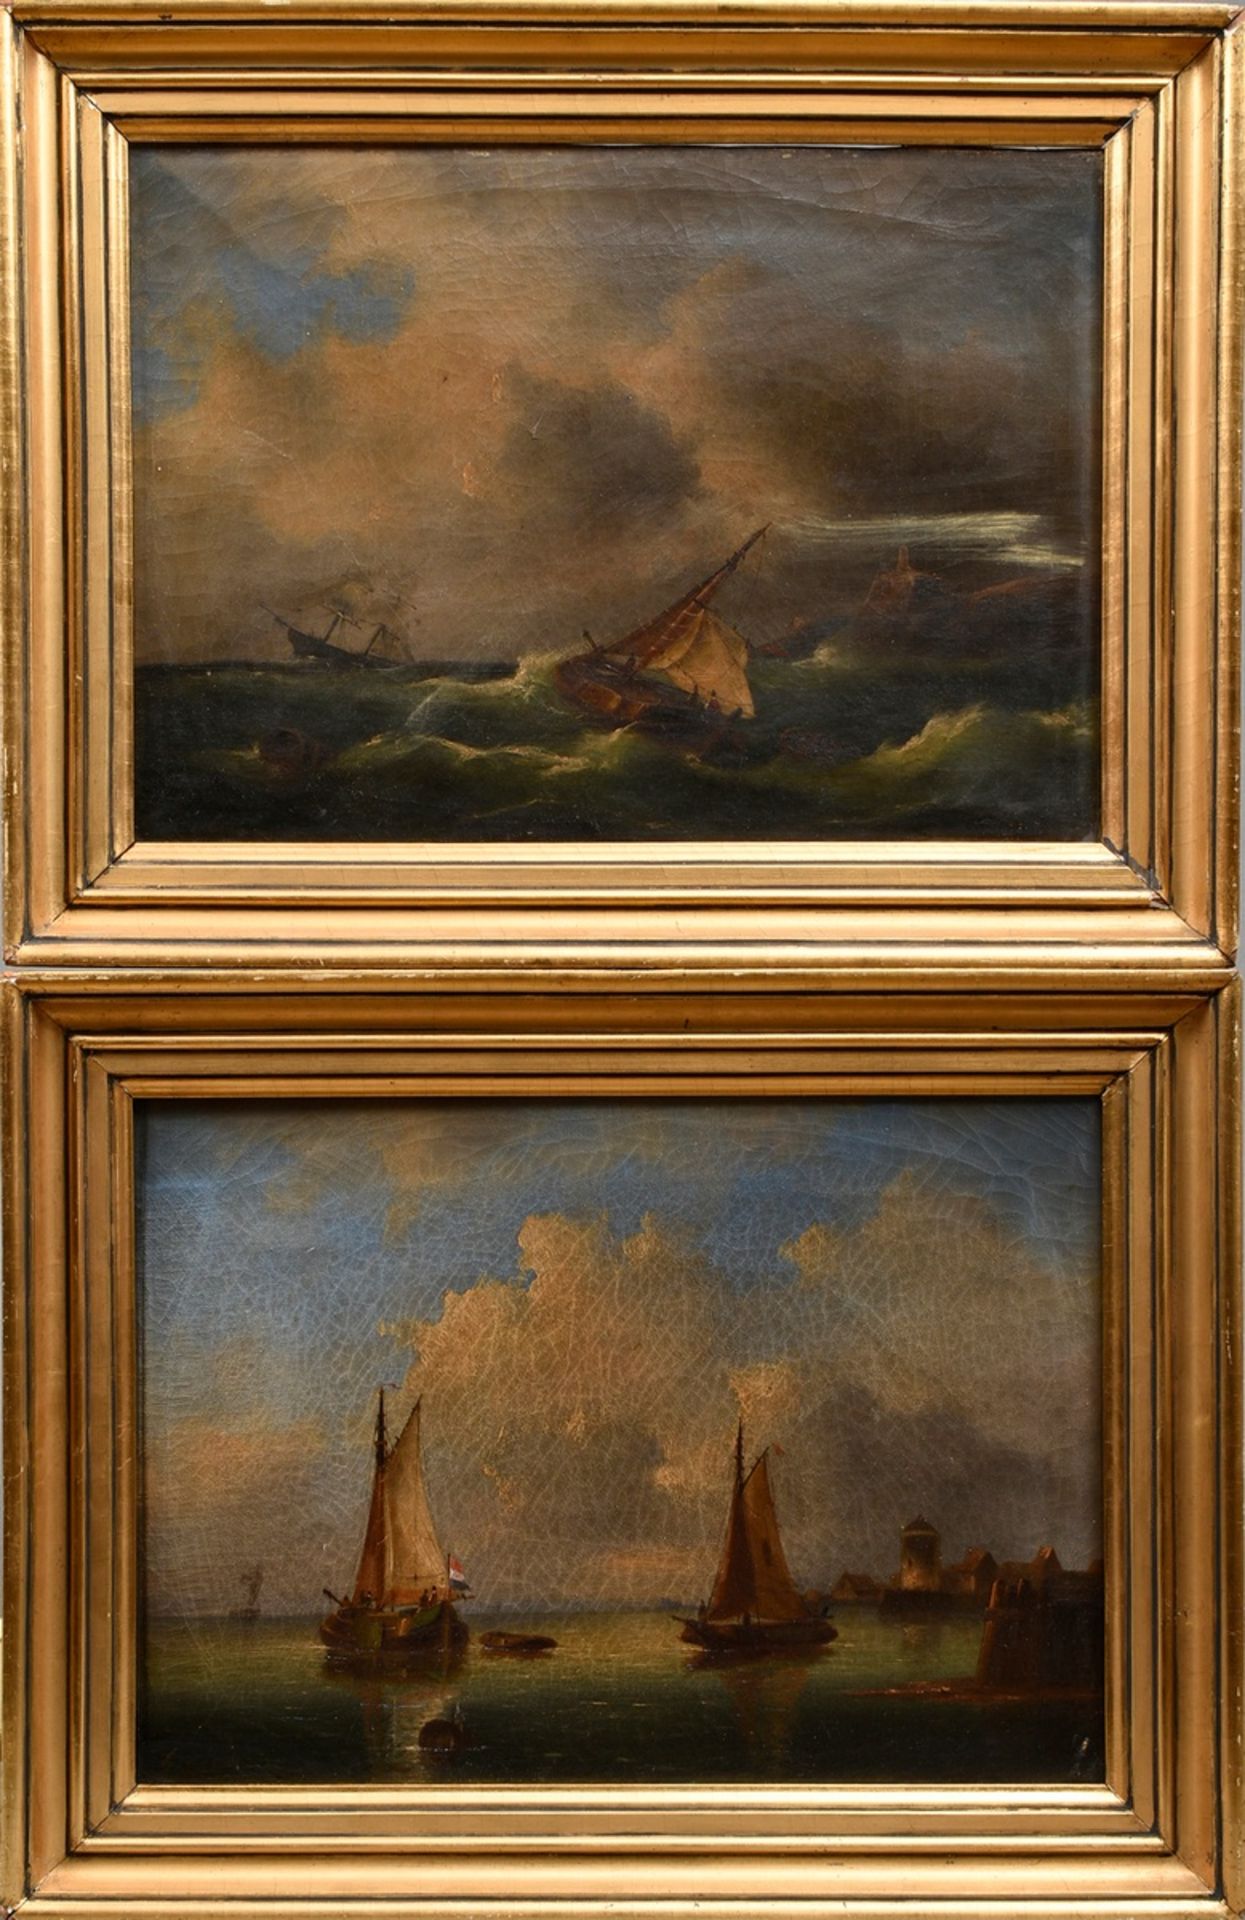 2 Unknown artist of the 18th/19th c. "Dutch Navy Motivs", oil/canvas, each illegibly sign. lower le